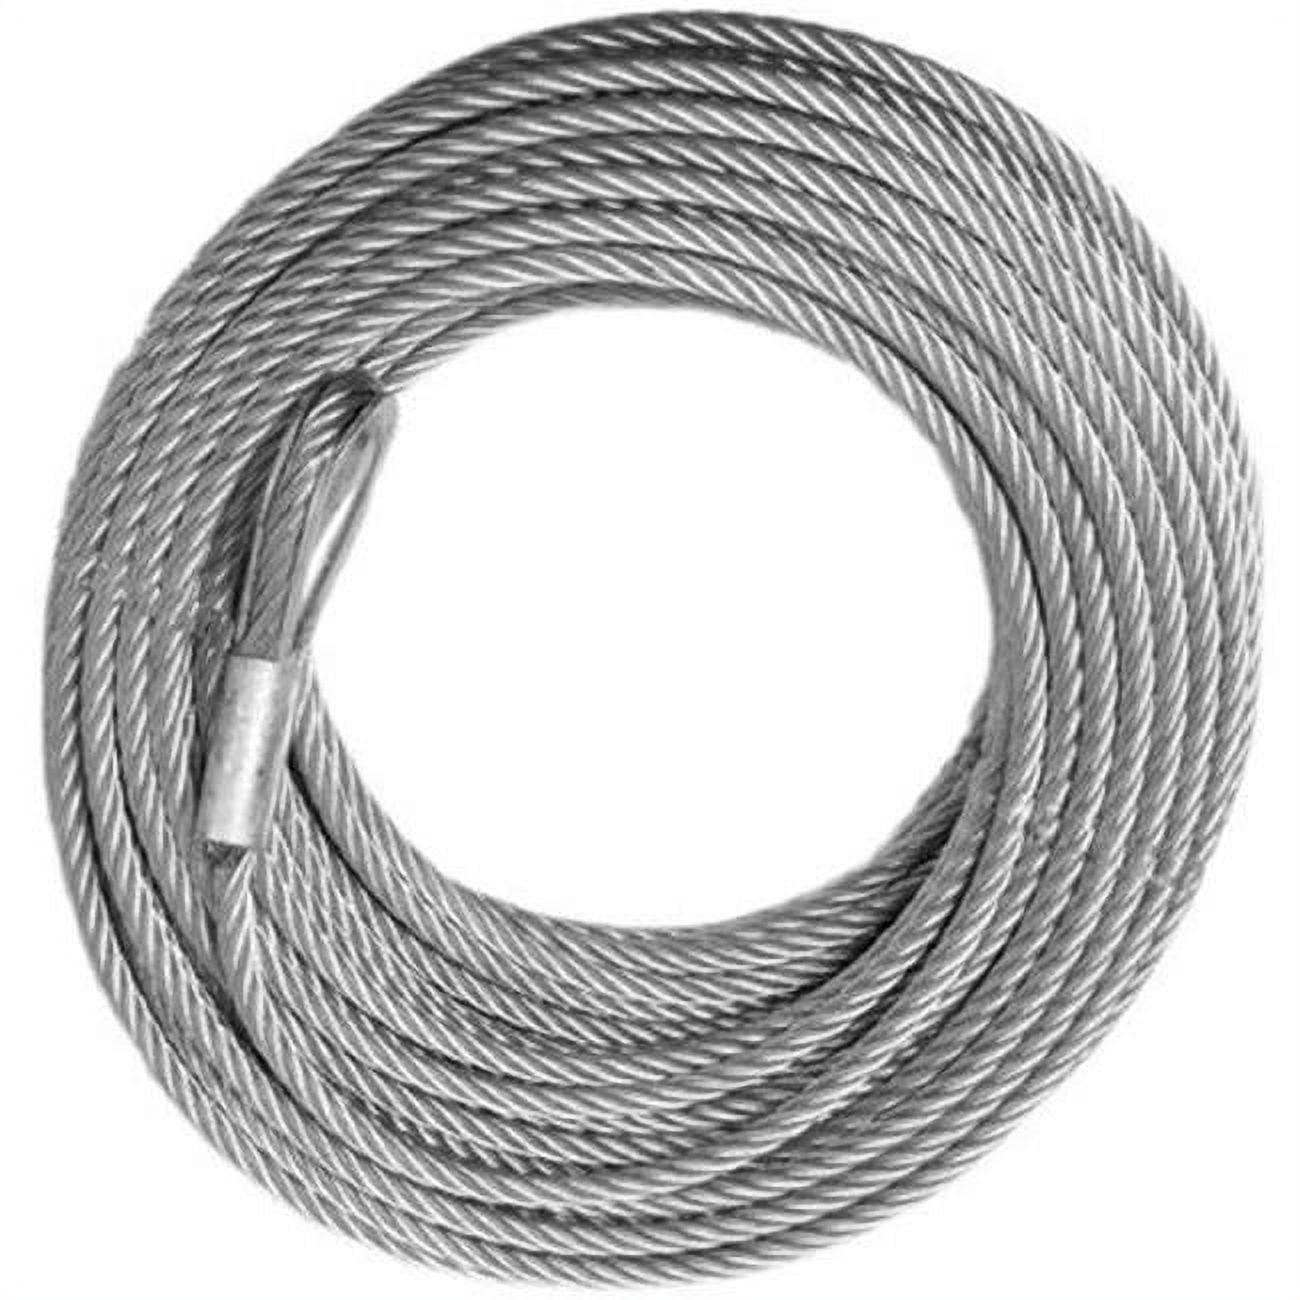 Winch Cable - Galvanized - 5/16 X 150 (9 800lb Strength) (4x4 Vehicle Recovery)